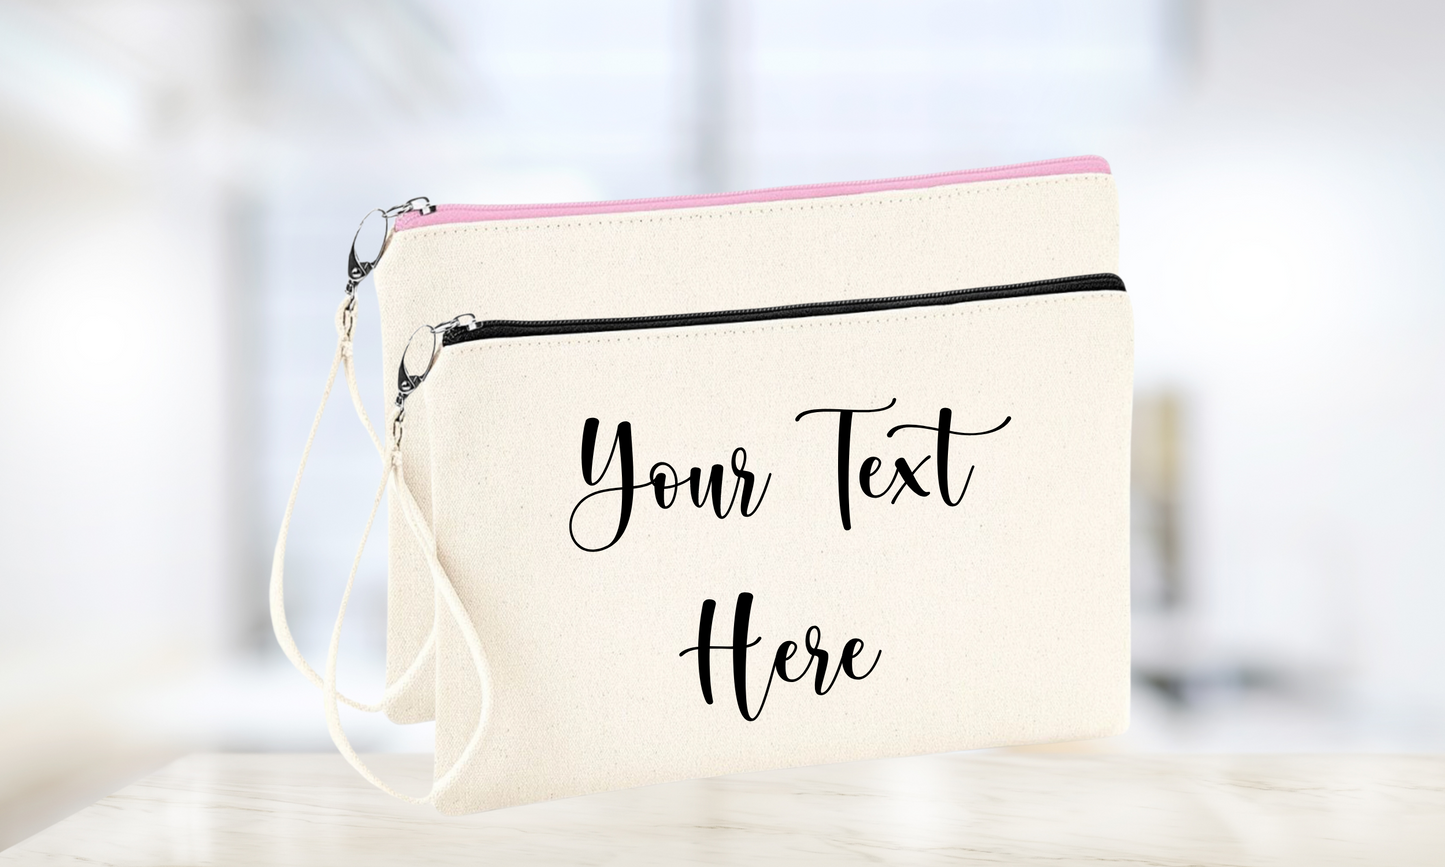 Add your own wording to your cosmetic bag